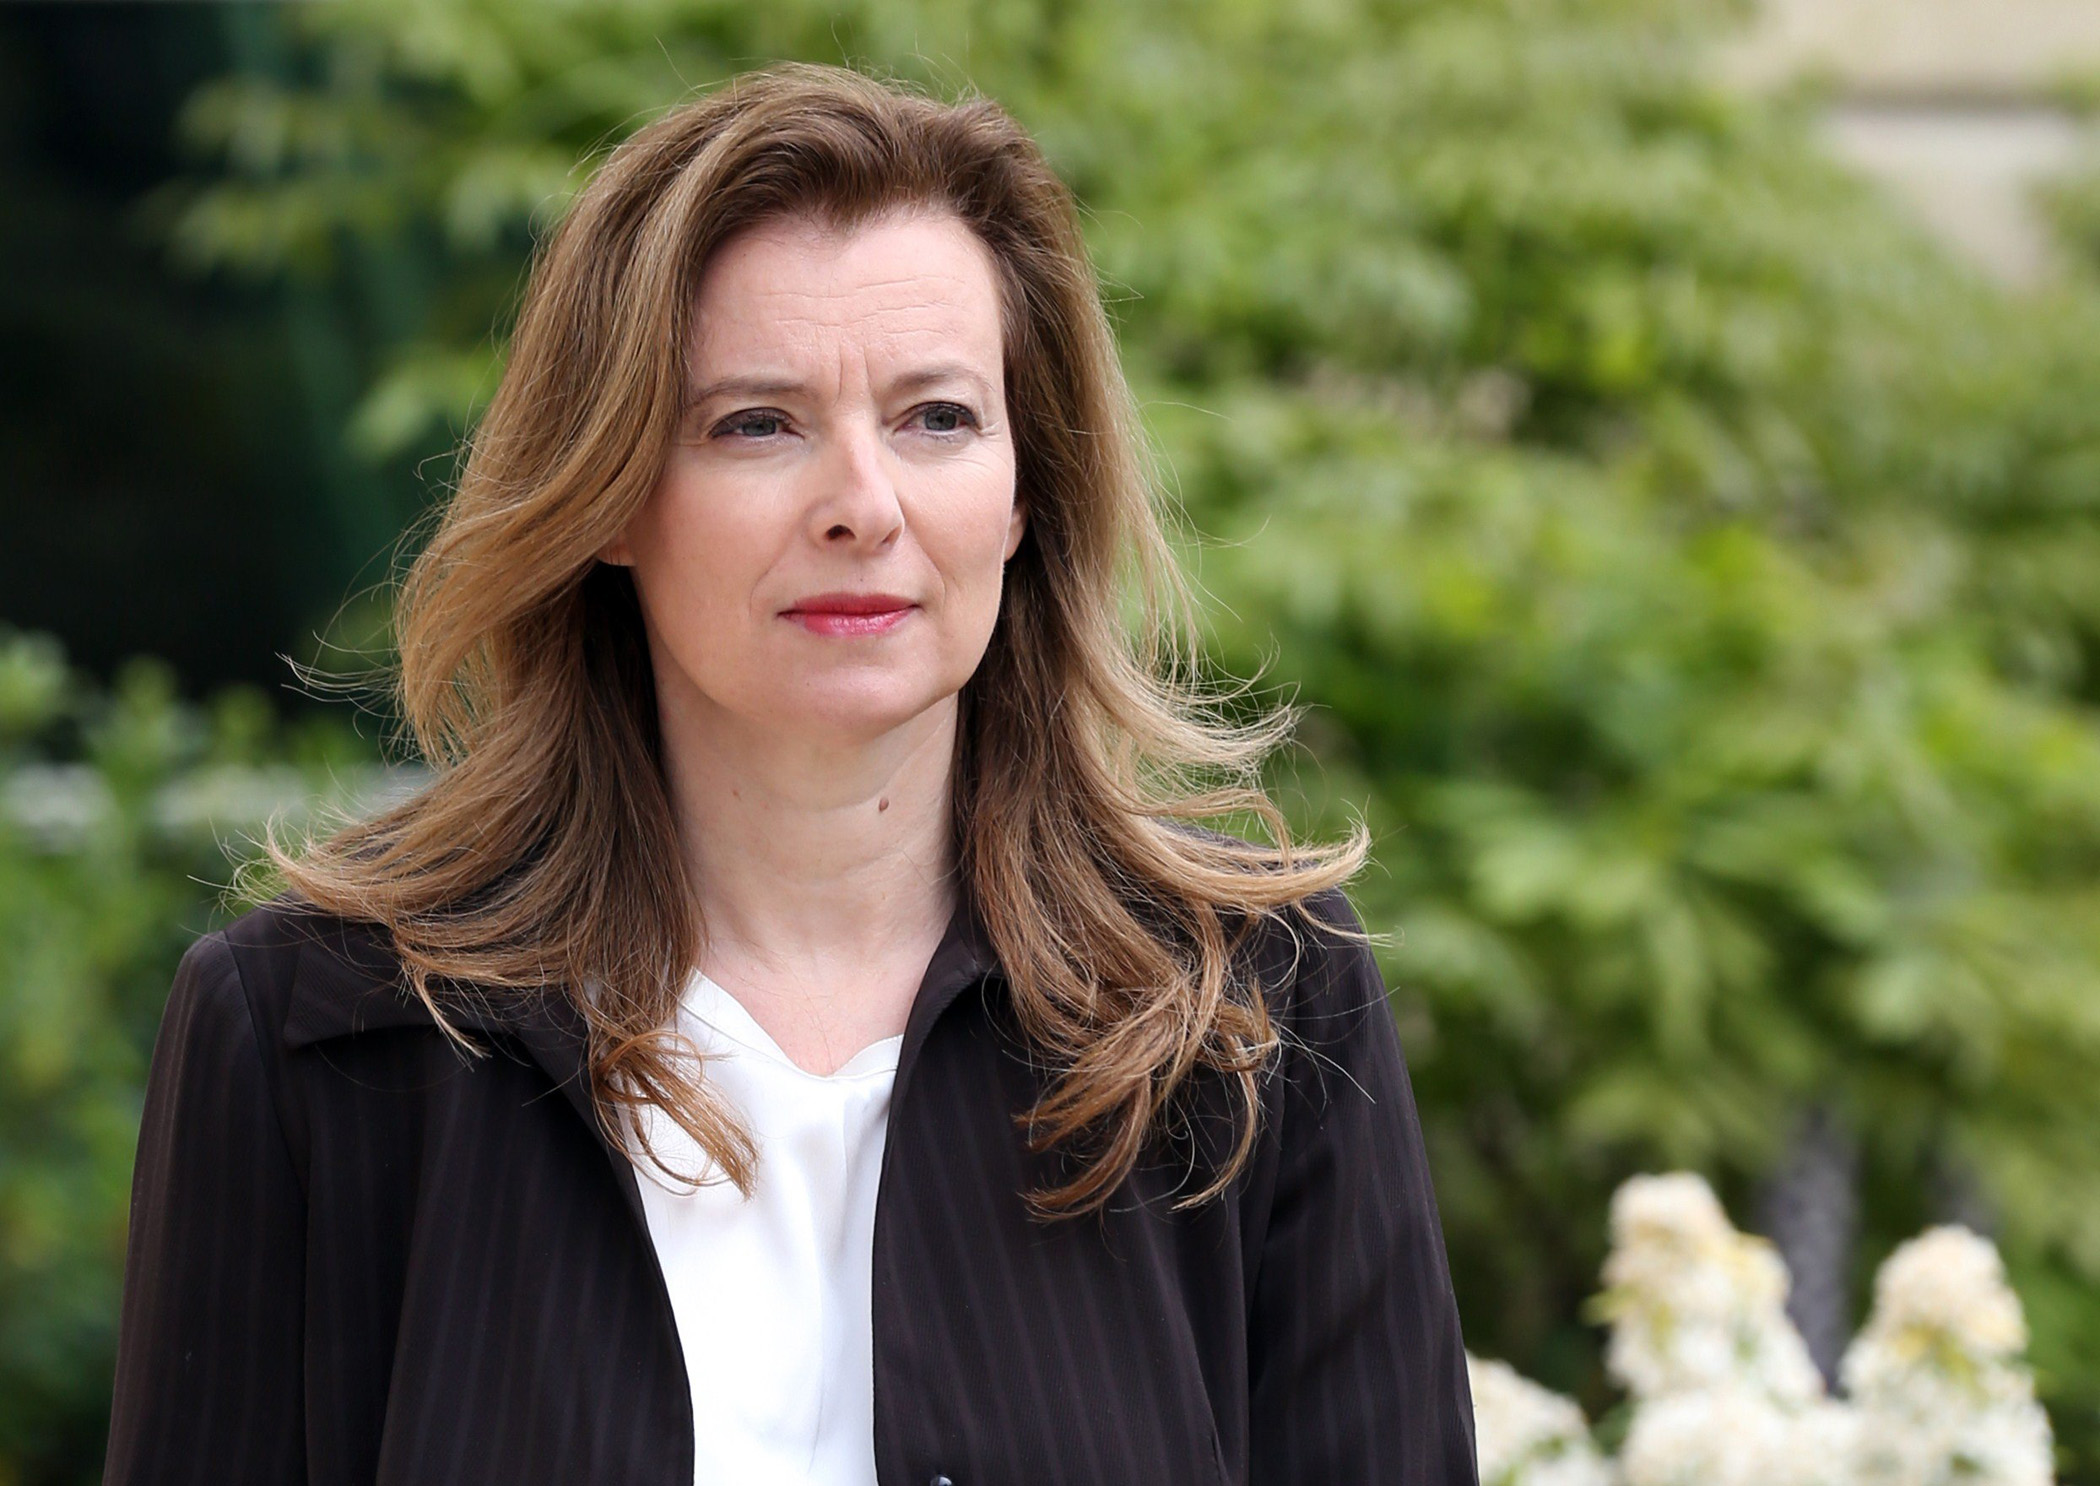 Valerie Trierweiler in the gardens at the Elysee presidential palace in Paris in 2013.